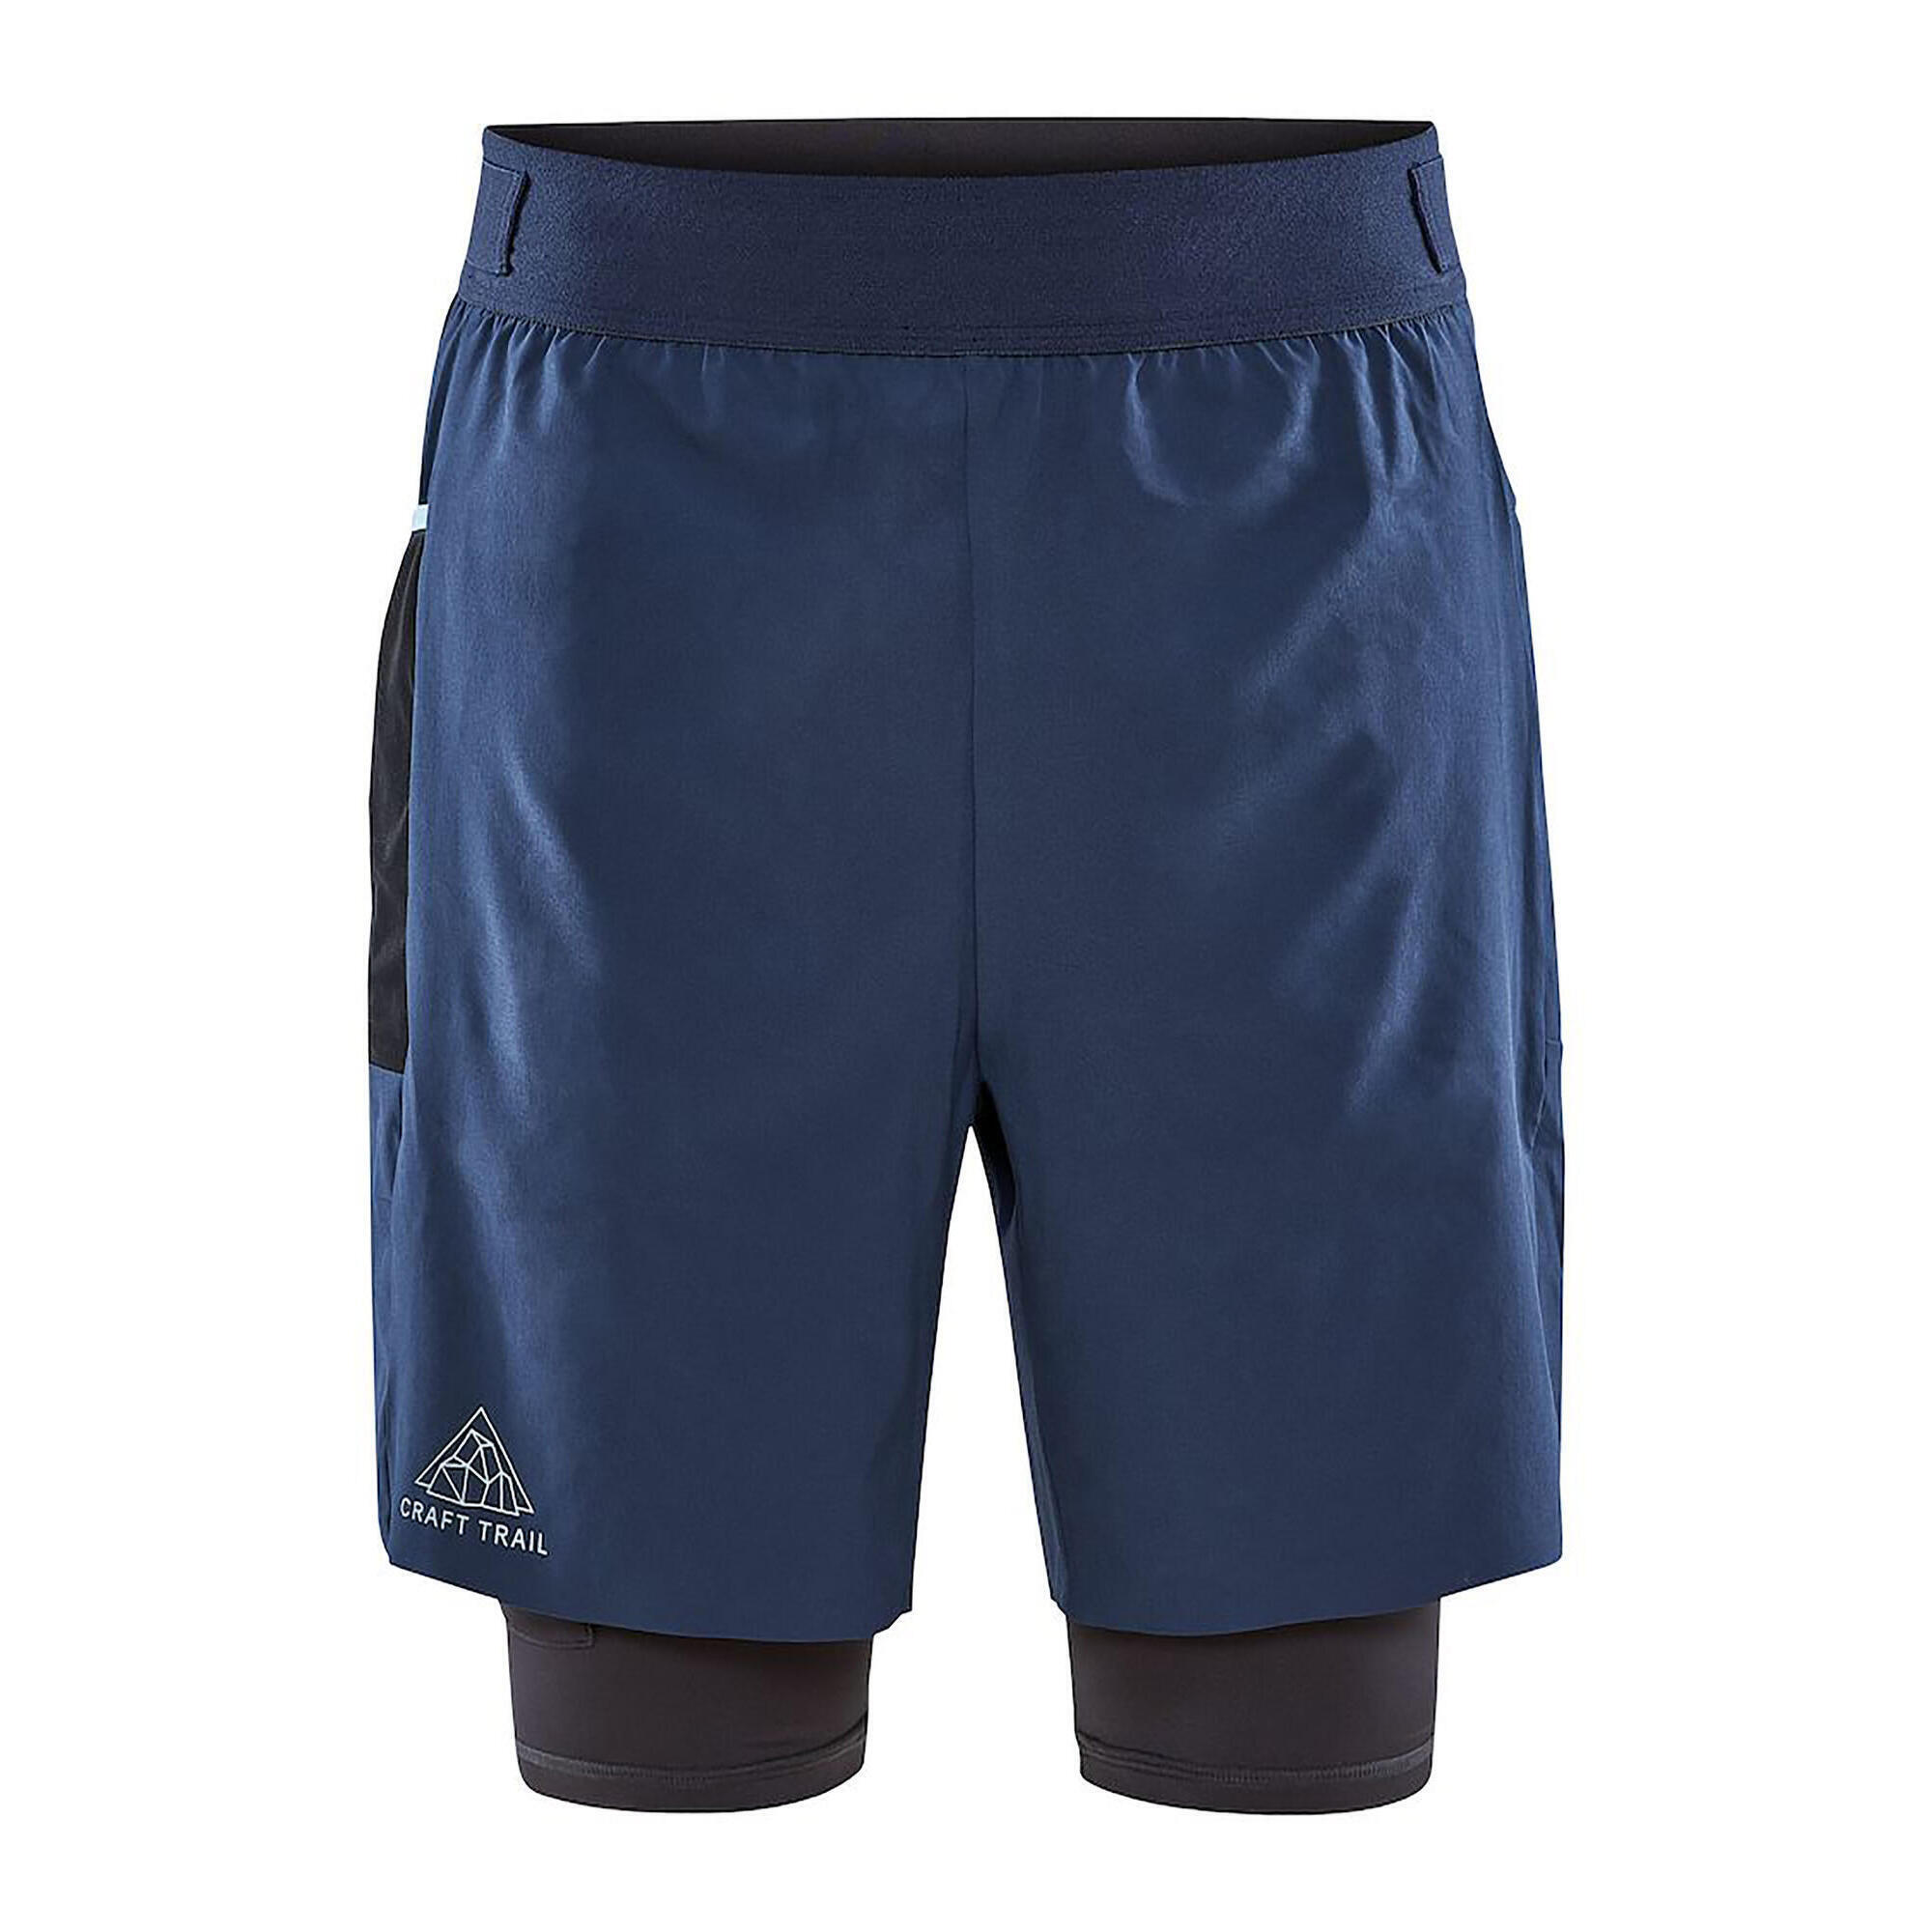 CRAFT Pro Trail 2in1 Shorts Men